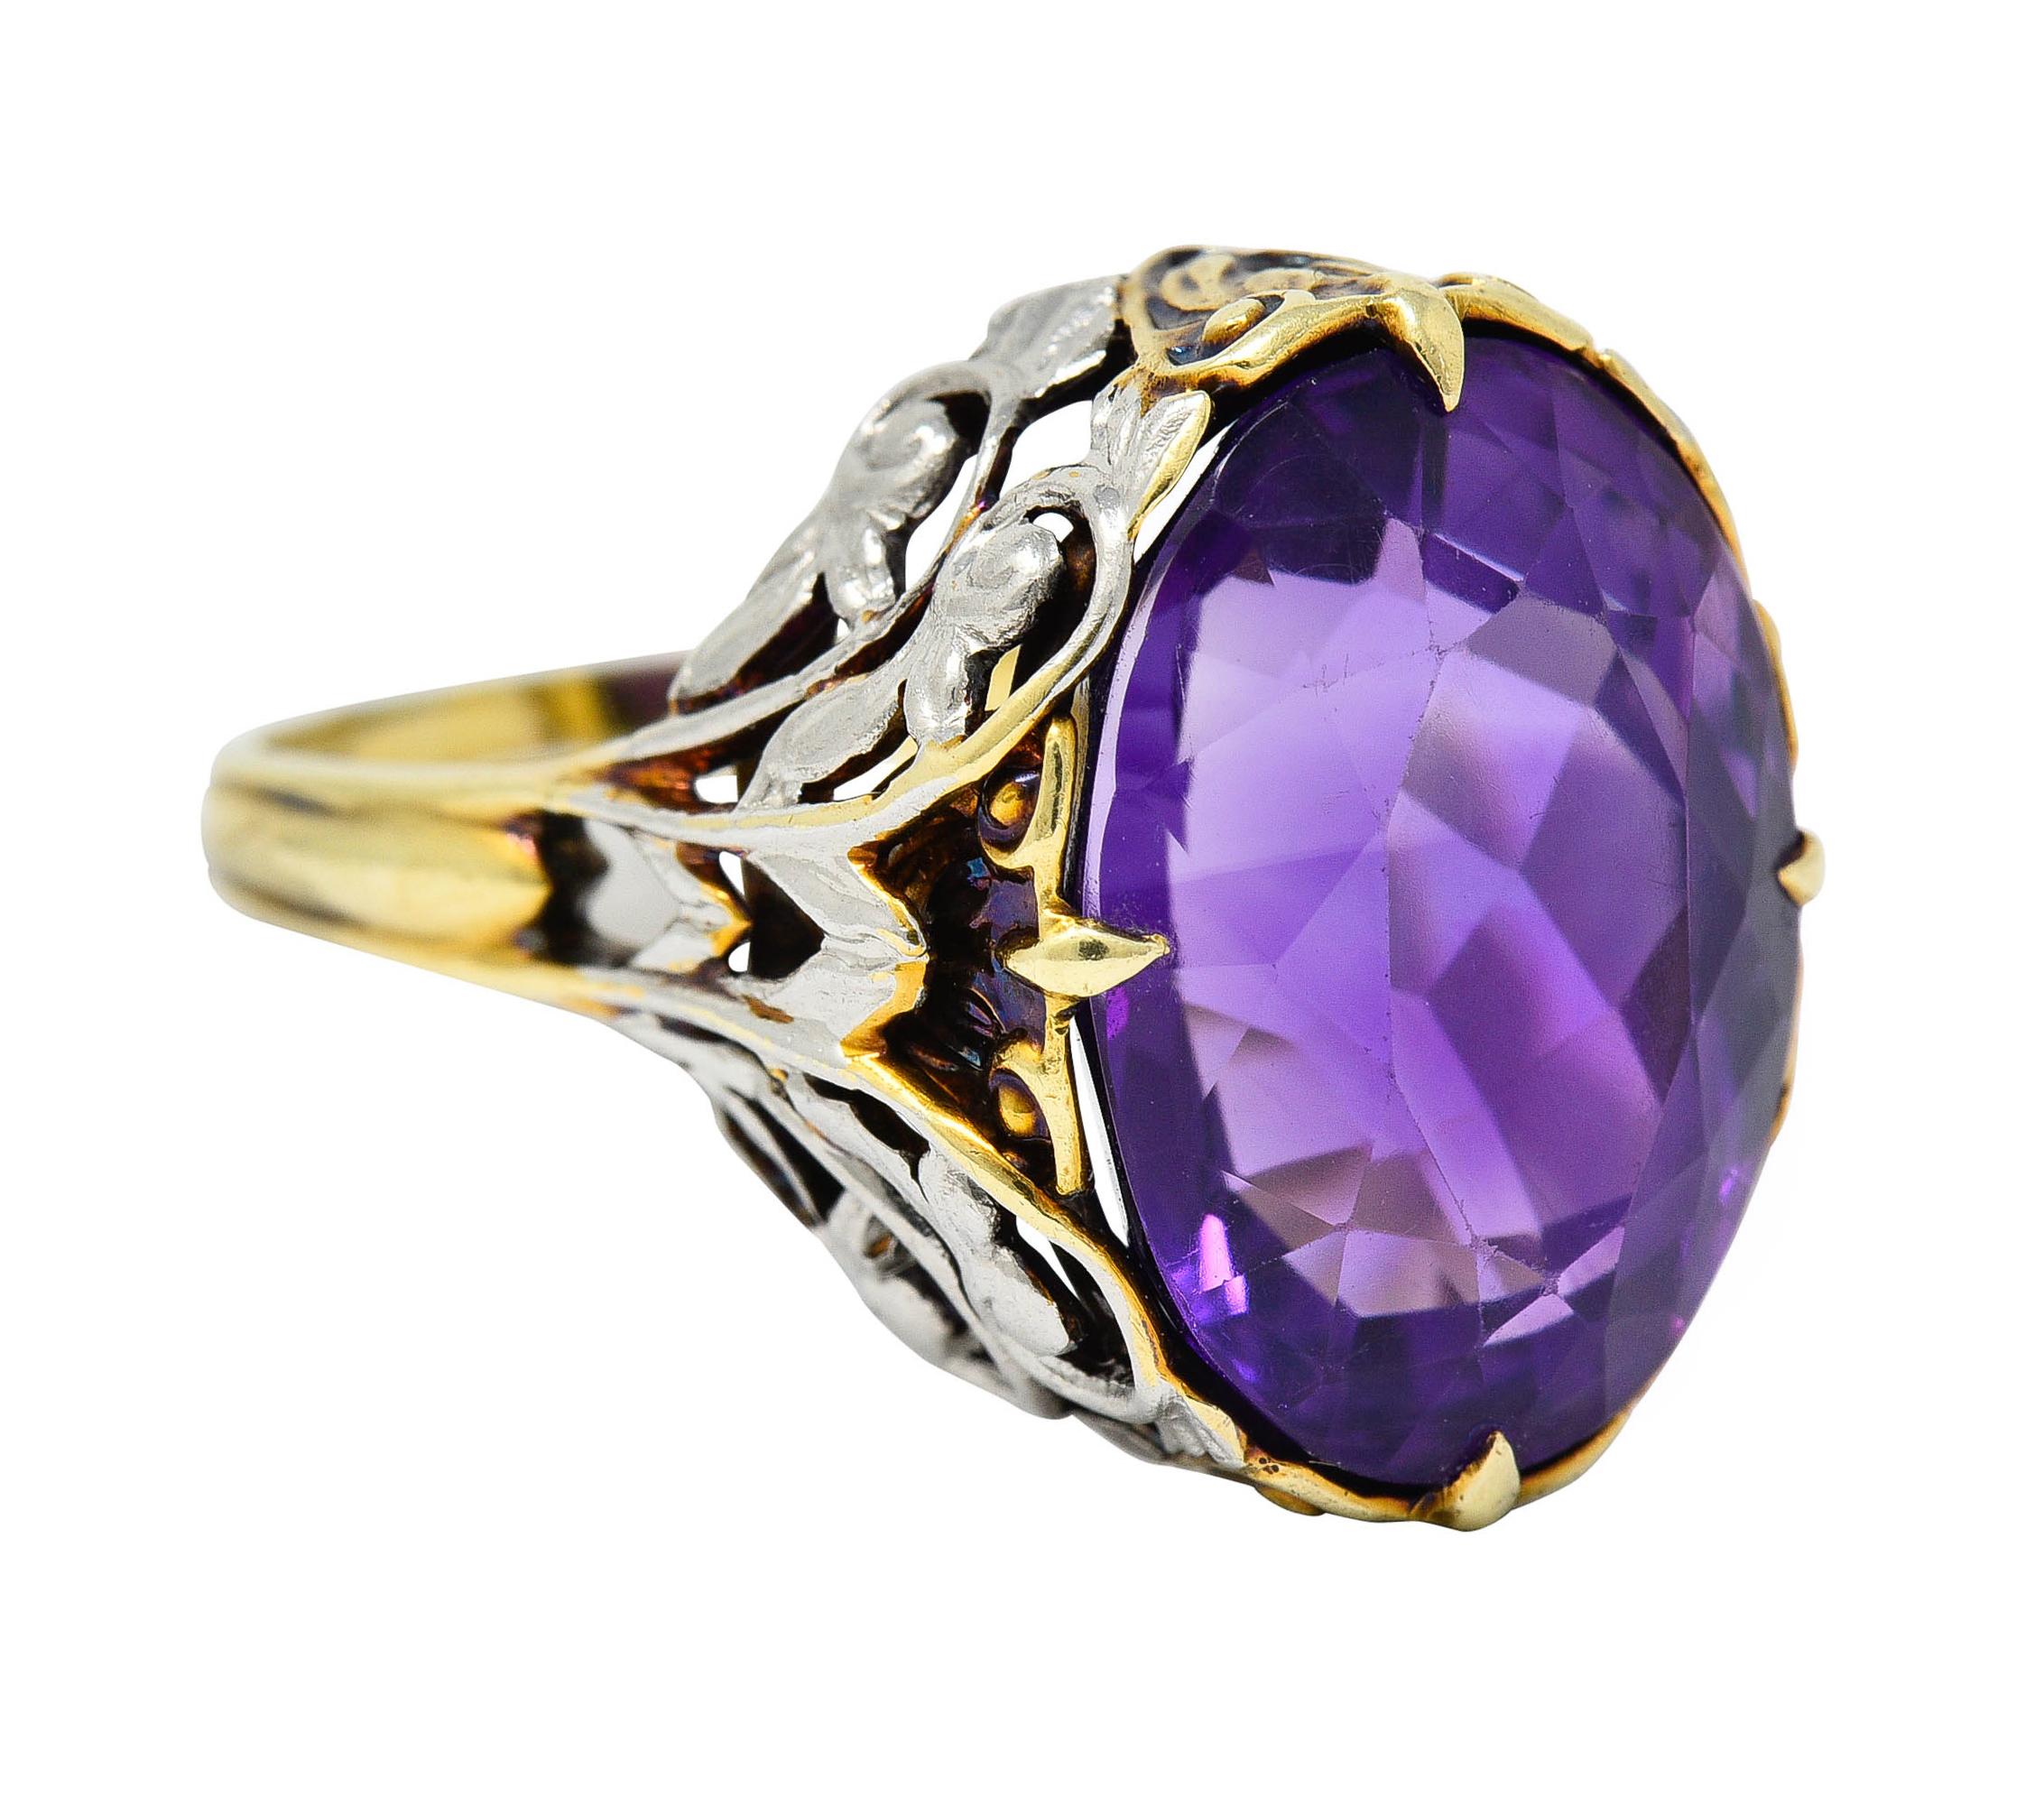 Centering a mixed oval cut amethyst measuring approximately 15.5 x 11.5 mm - saturated purple

With a pierced gallery comprised of scrolling foliate motifs accented by white gold appliquè

Stamped 14K for 14 karat gold

With maker's mark for